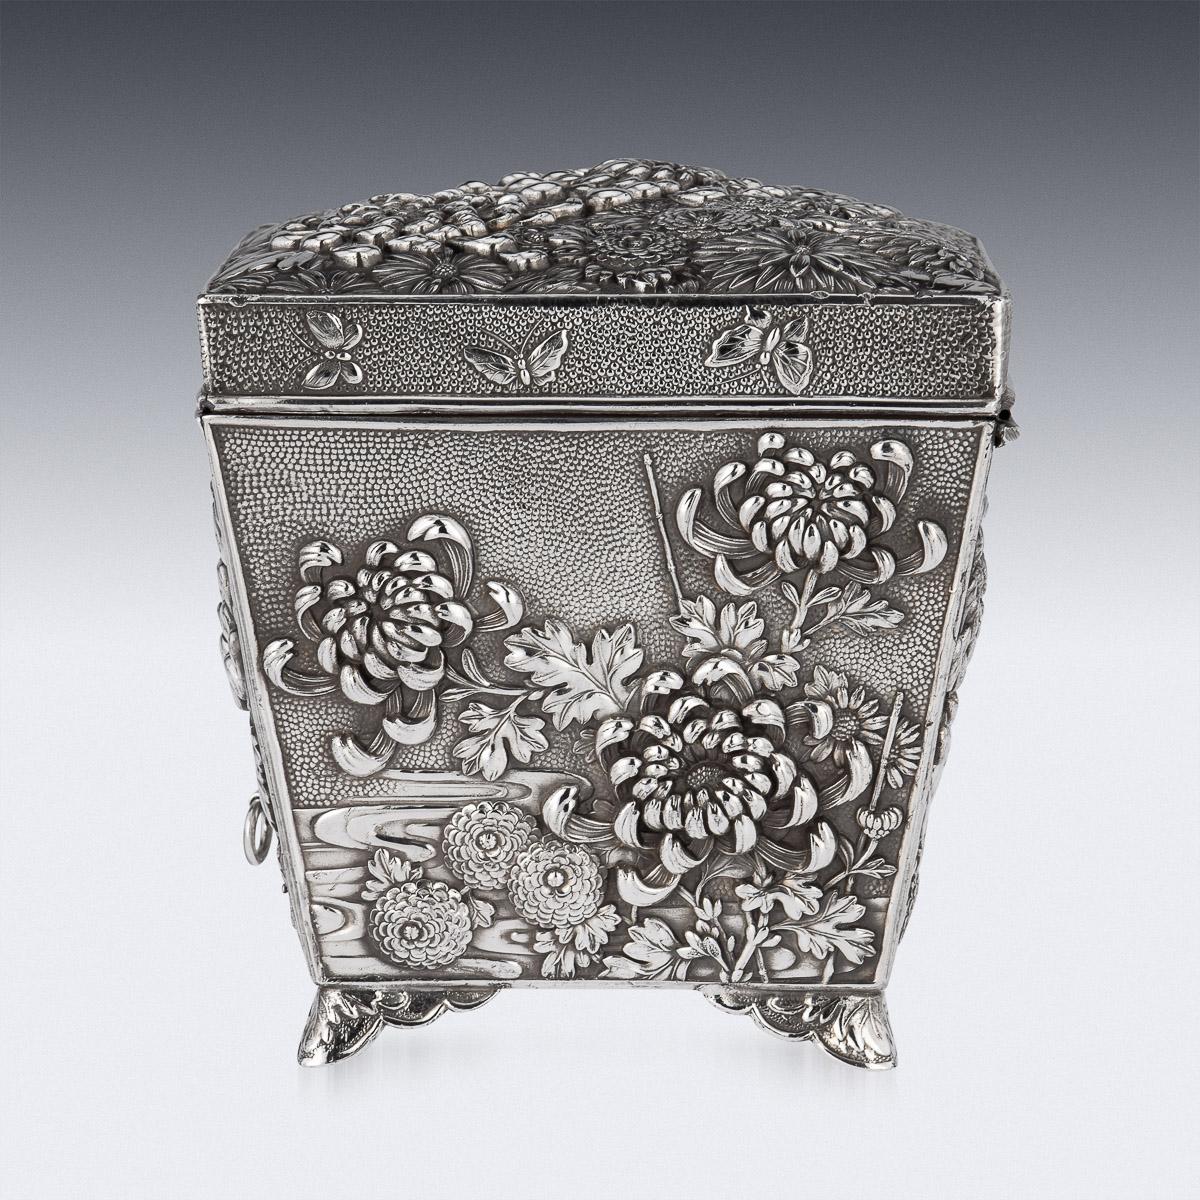 20th Century Japanese silver plated double compartment jewellery chest, of exceptional quality, embossed with with chrysanthemums, butterflies and foliage in high relief on matted ground. Comes with original key and working lock.

Condition
In